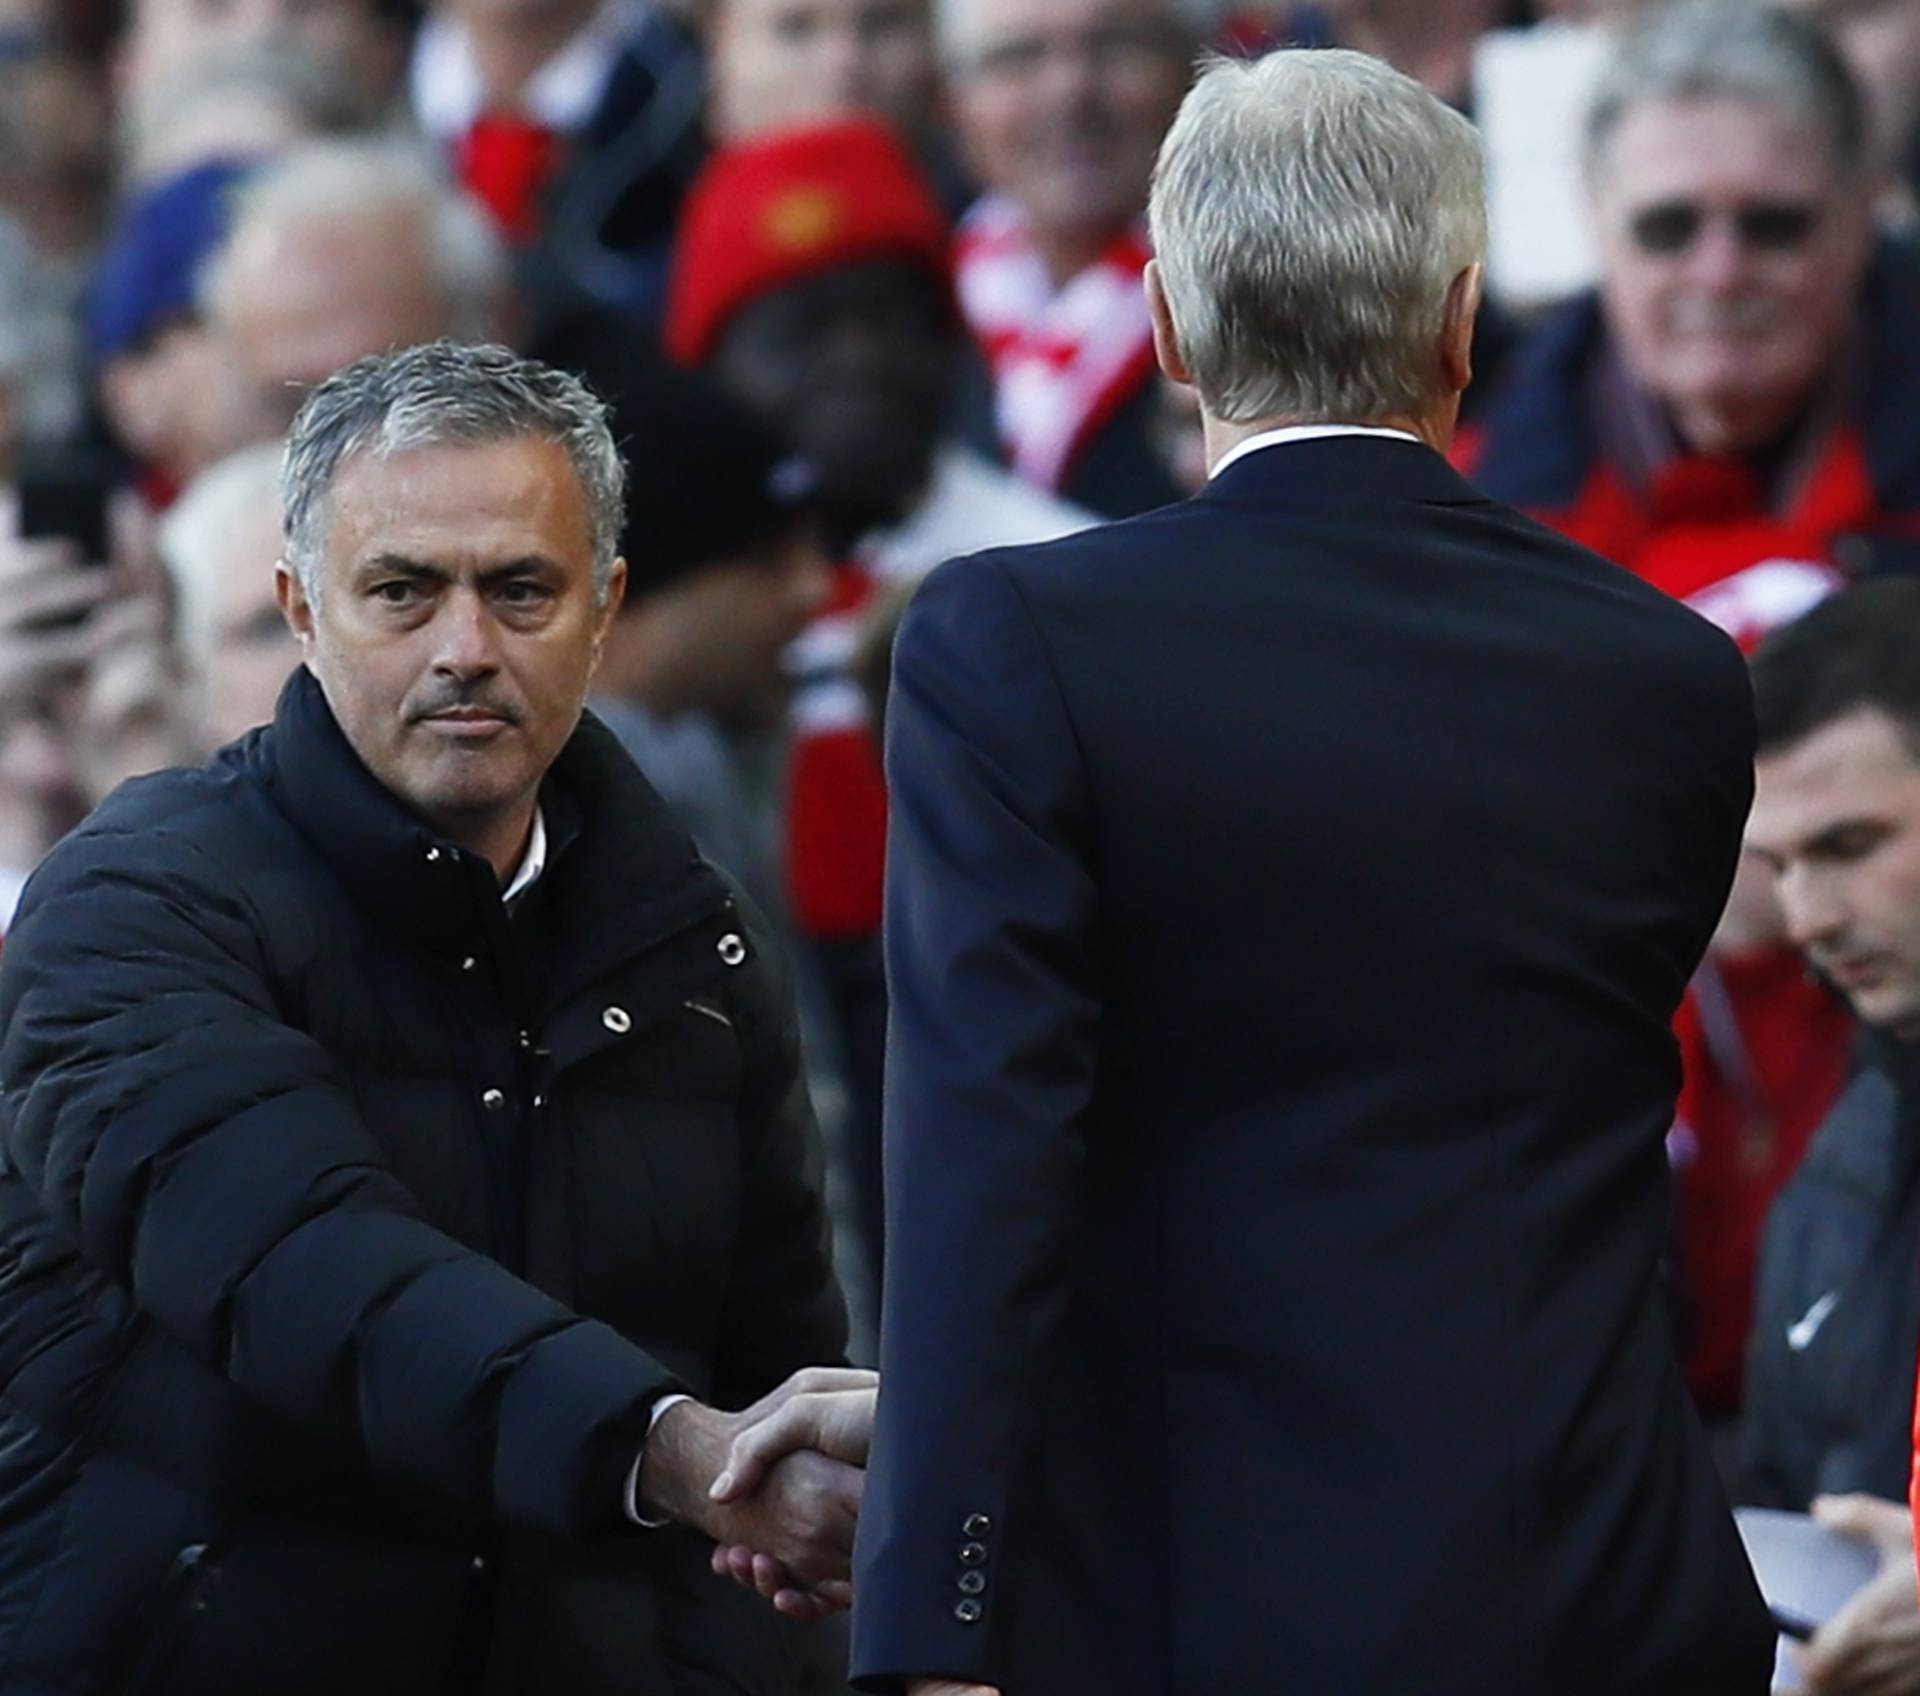 Manchester United manager Jose Mourinho and Arsenal manager Arsene Wenger shake hands before the match